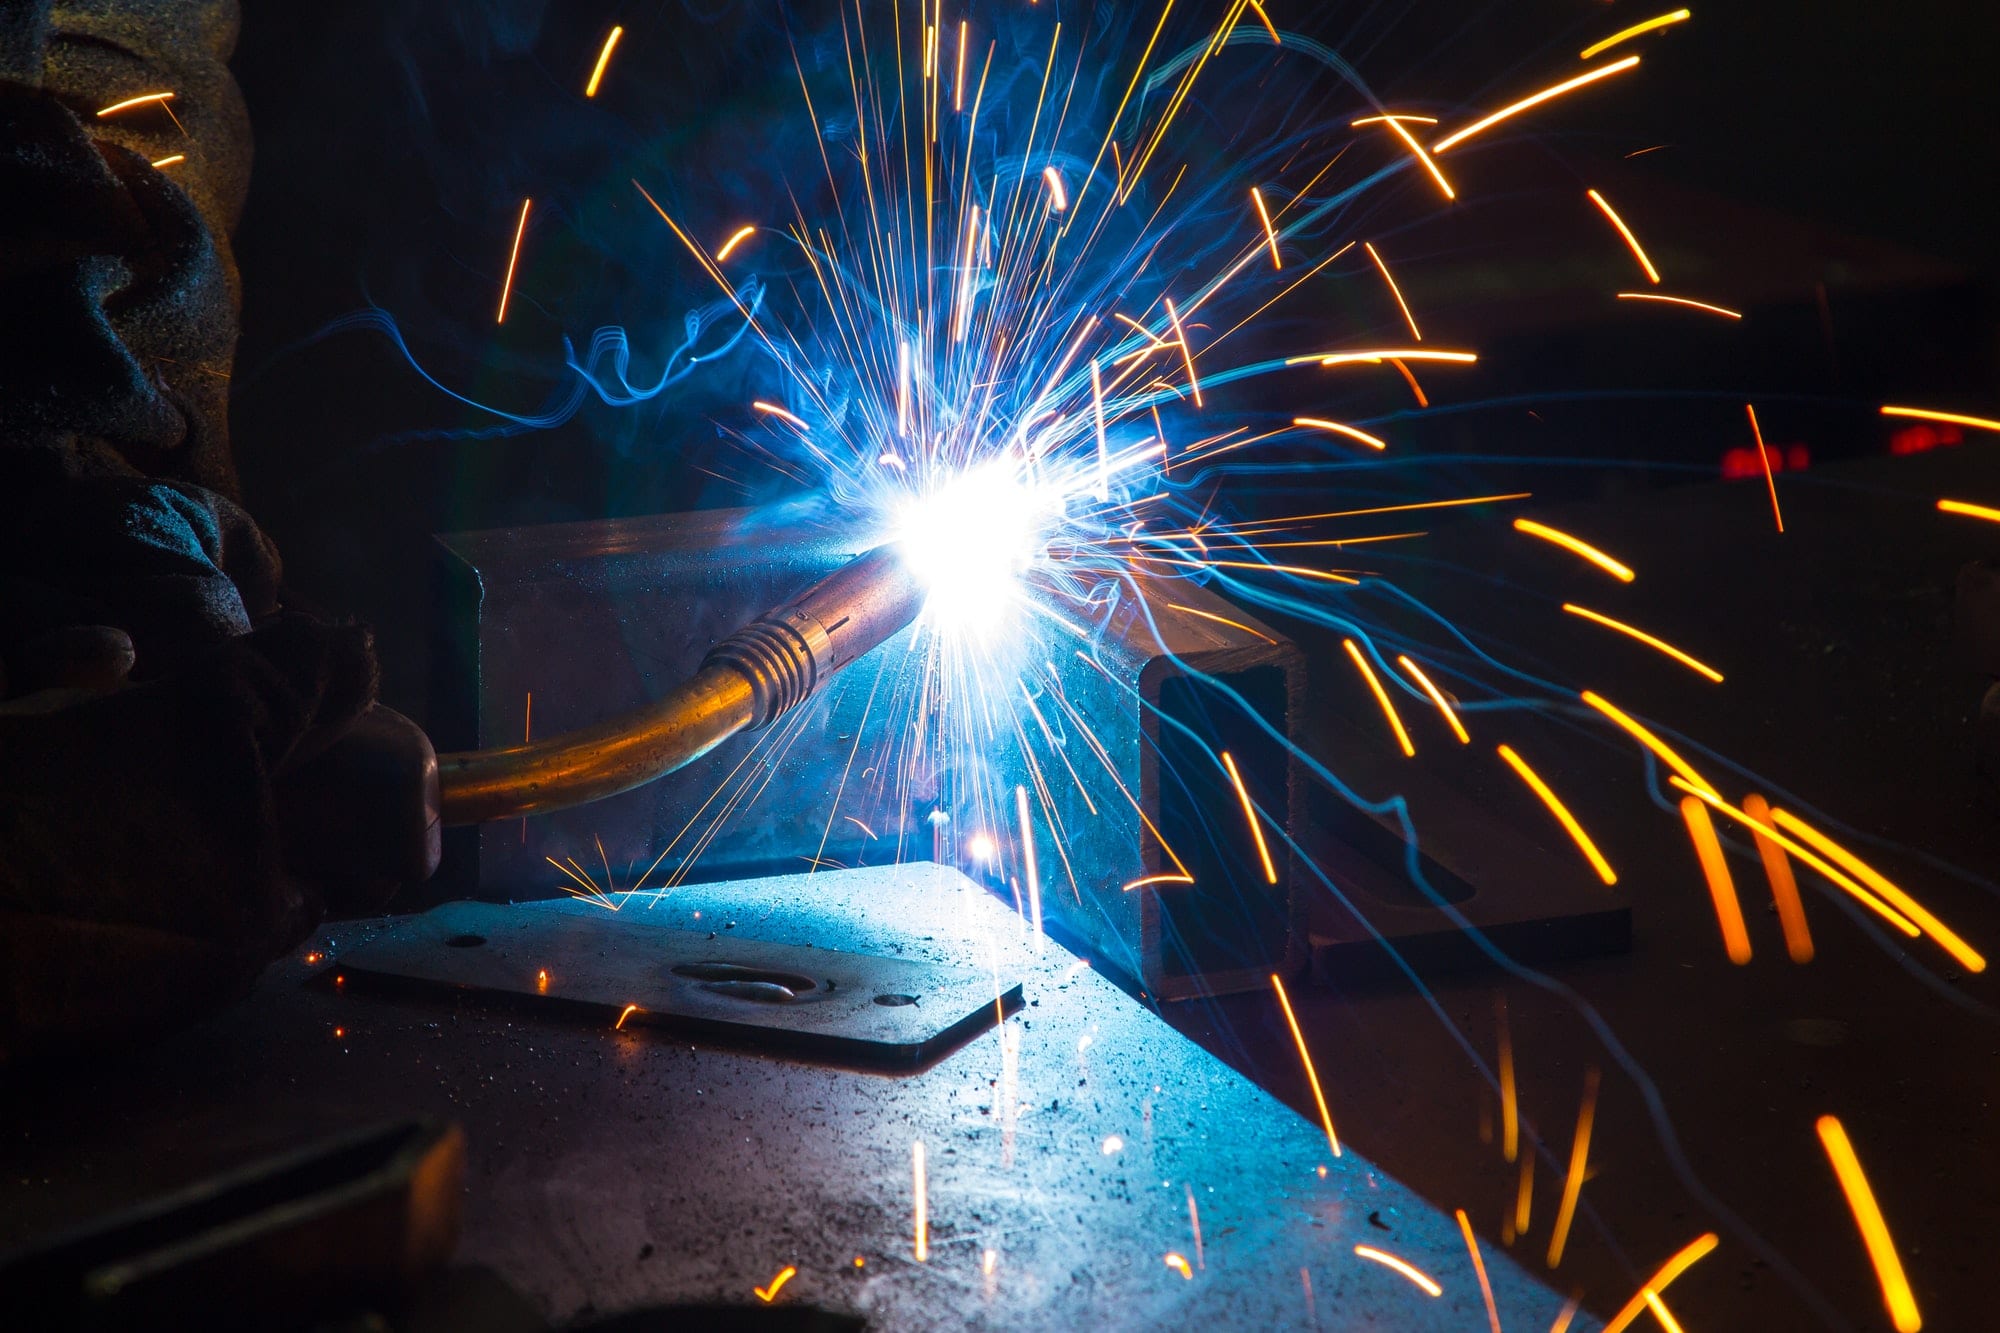 Welding process with sparks